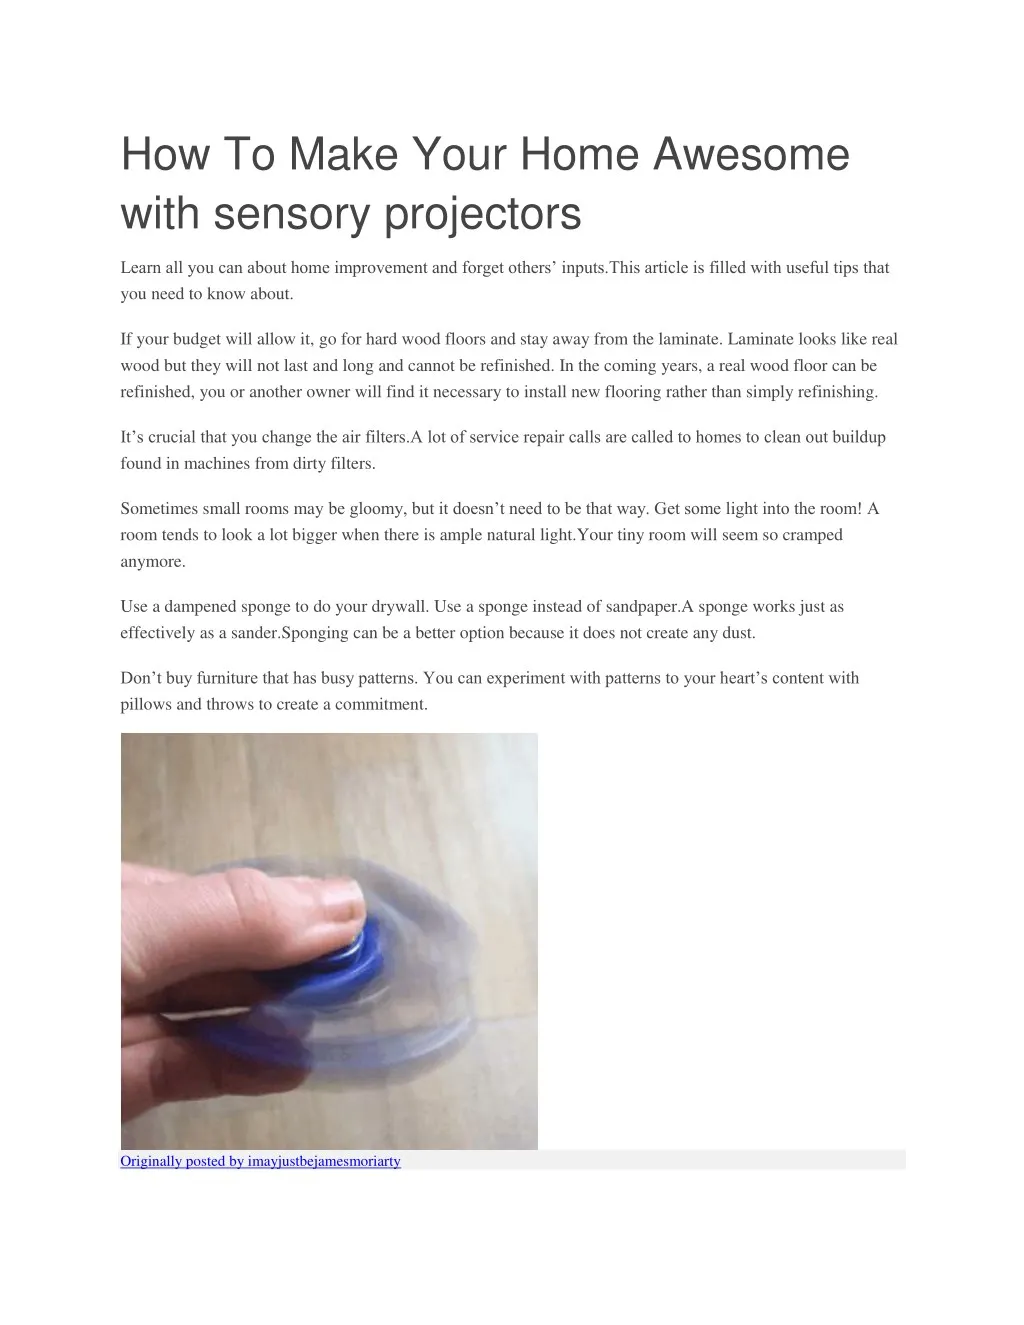 how to make your home awesome with sensory